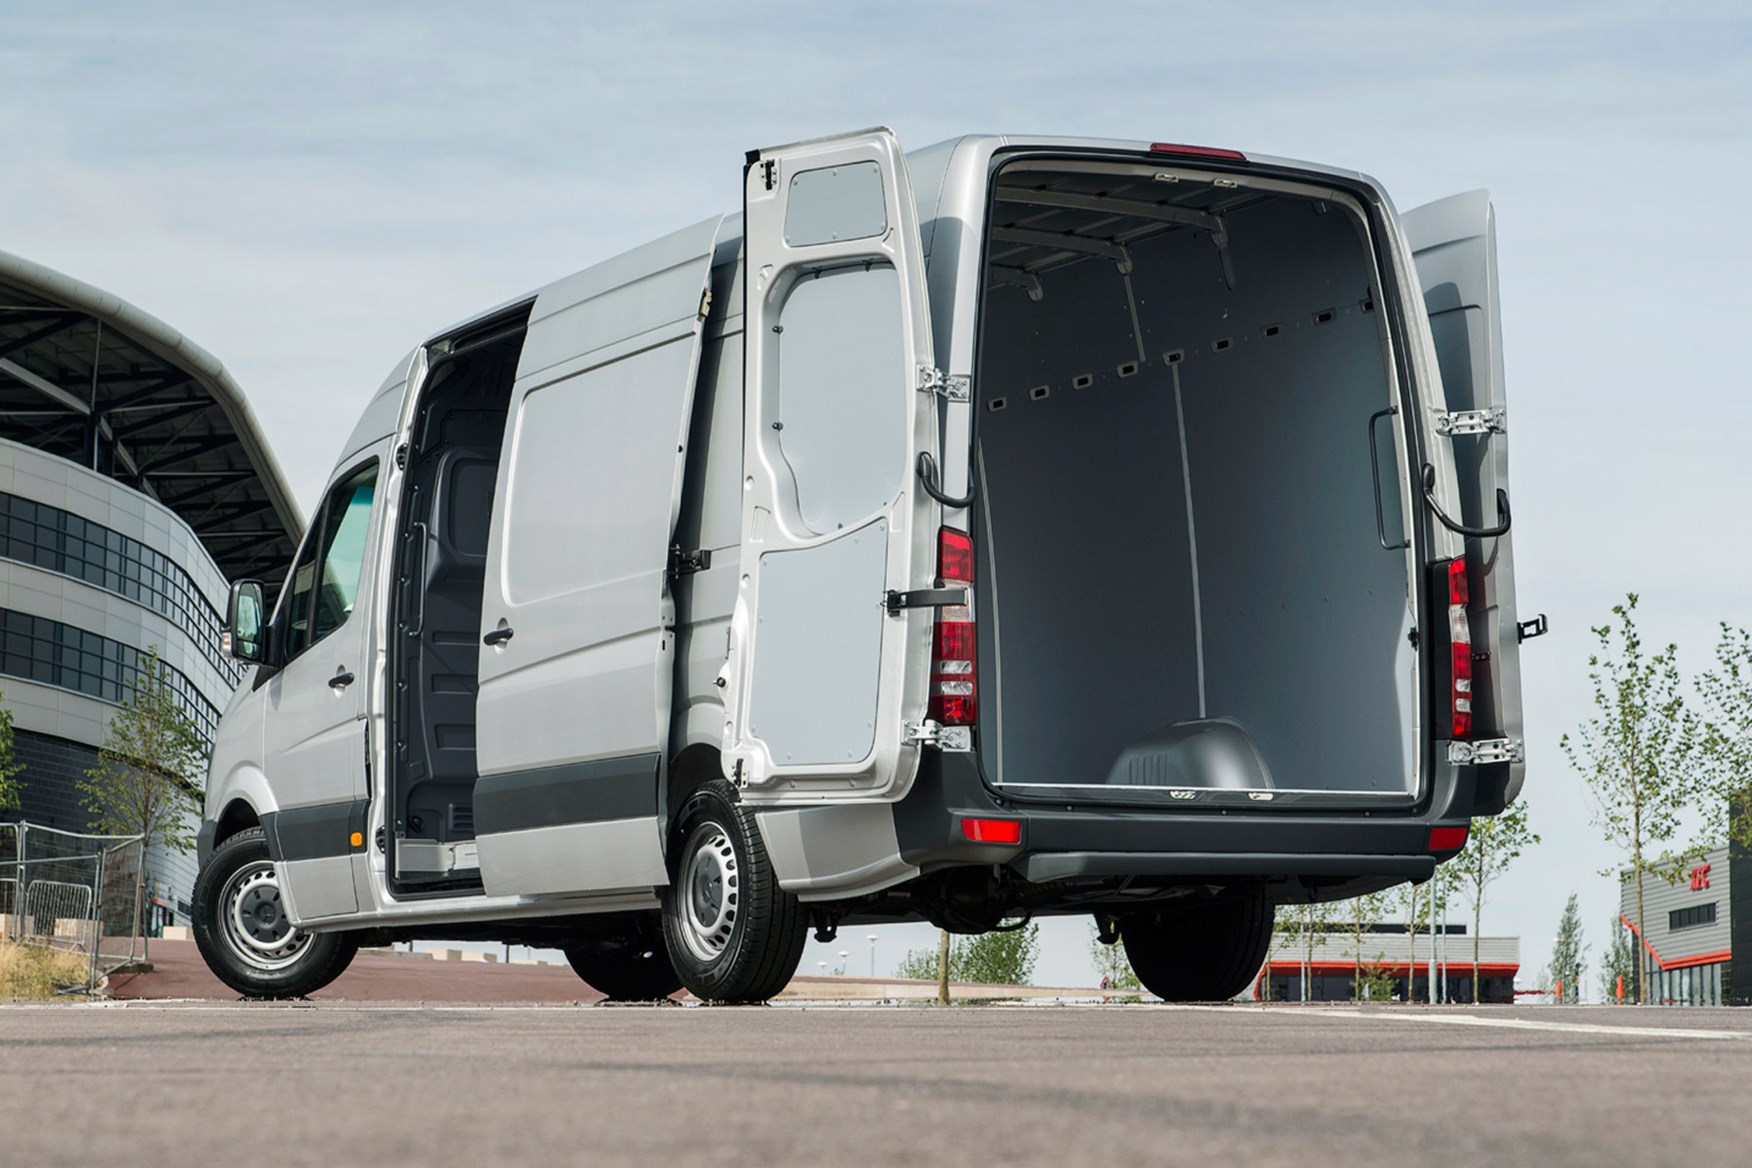 Mercedes-Benz Sprinter full review on Parkers Vans - load area access